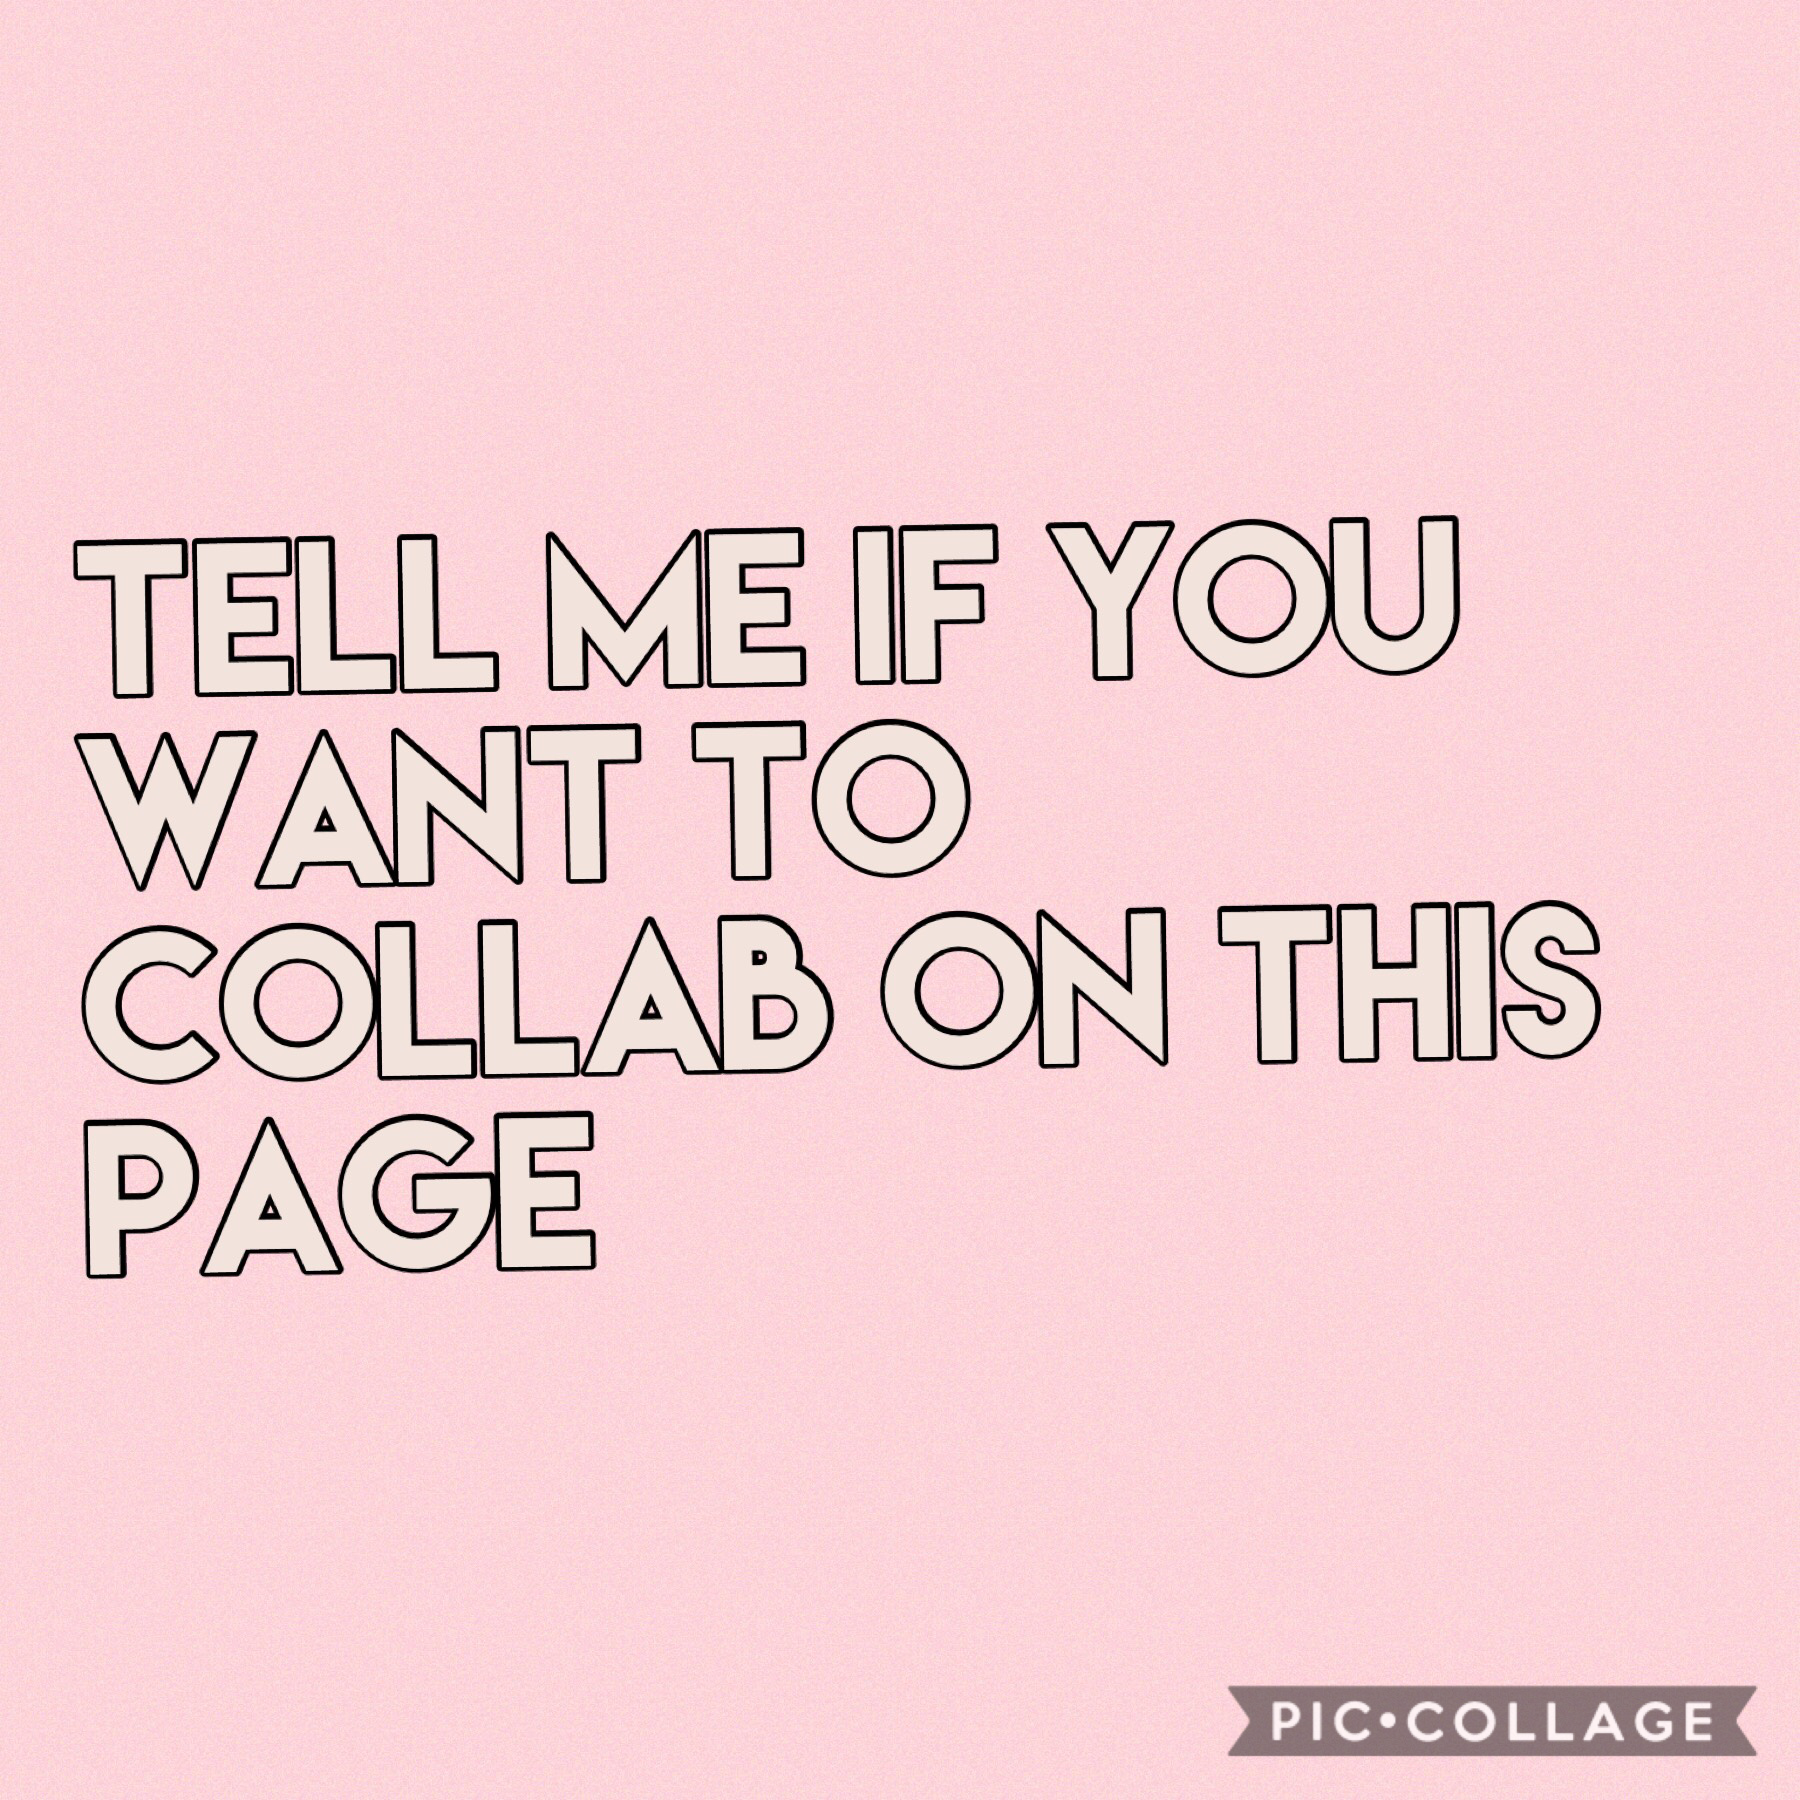 Tell me so I will do it with you
 QOTD: What is your favorite song?? Comment down below💛💛💛